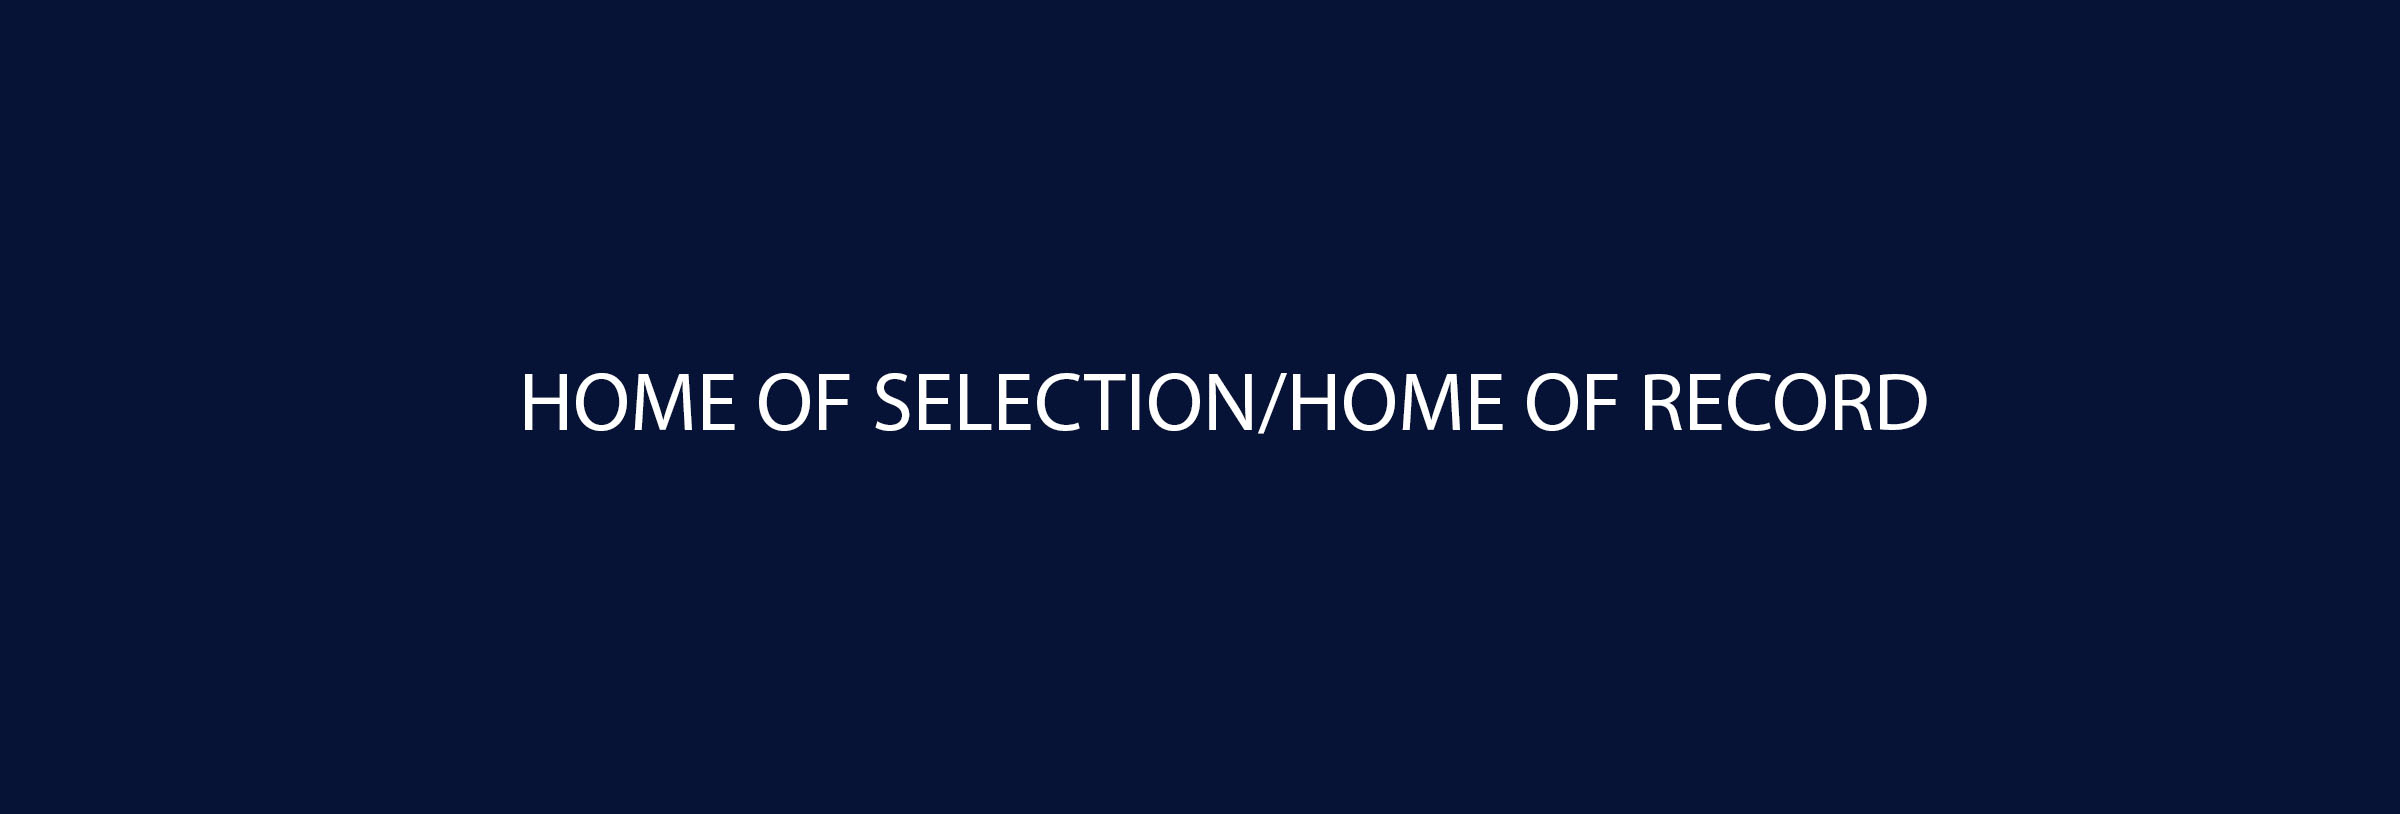 Home of Selection Page Break